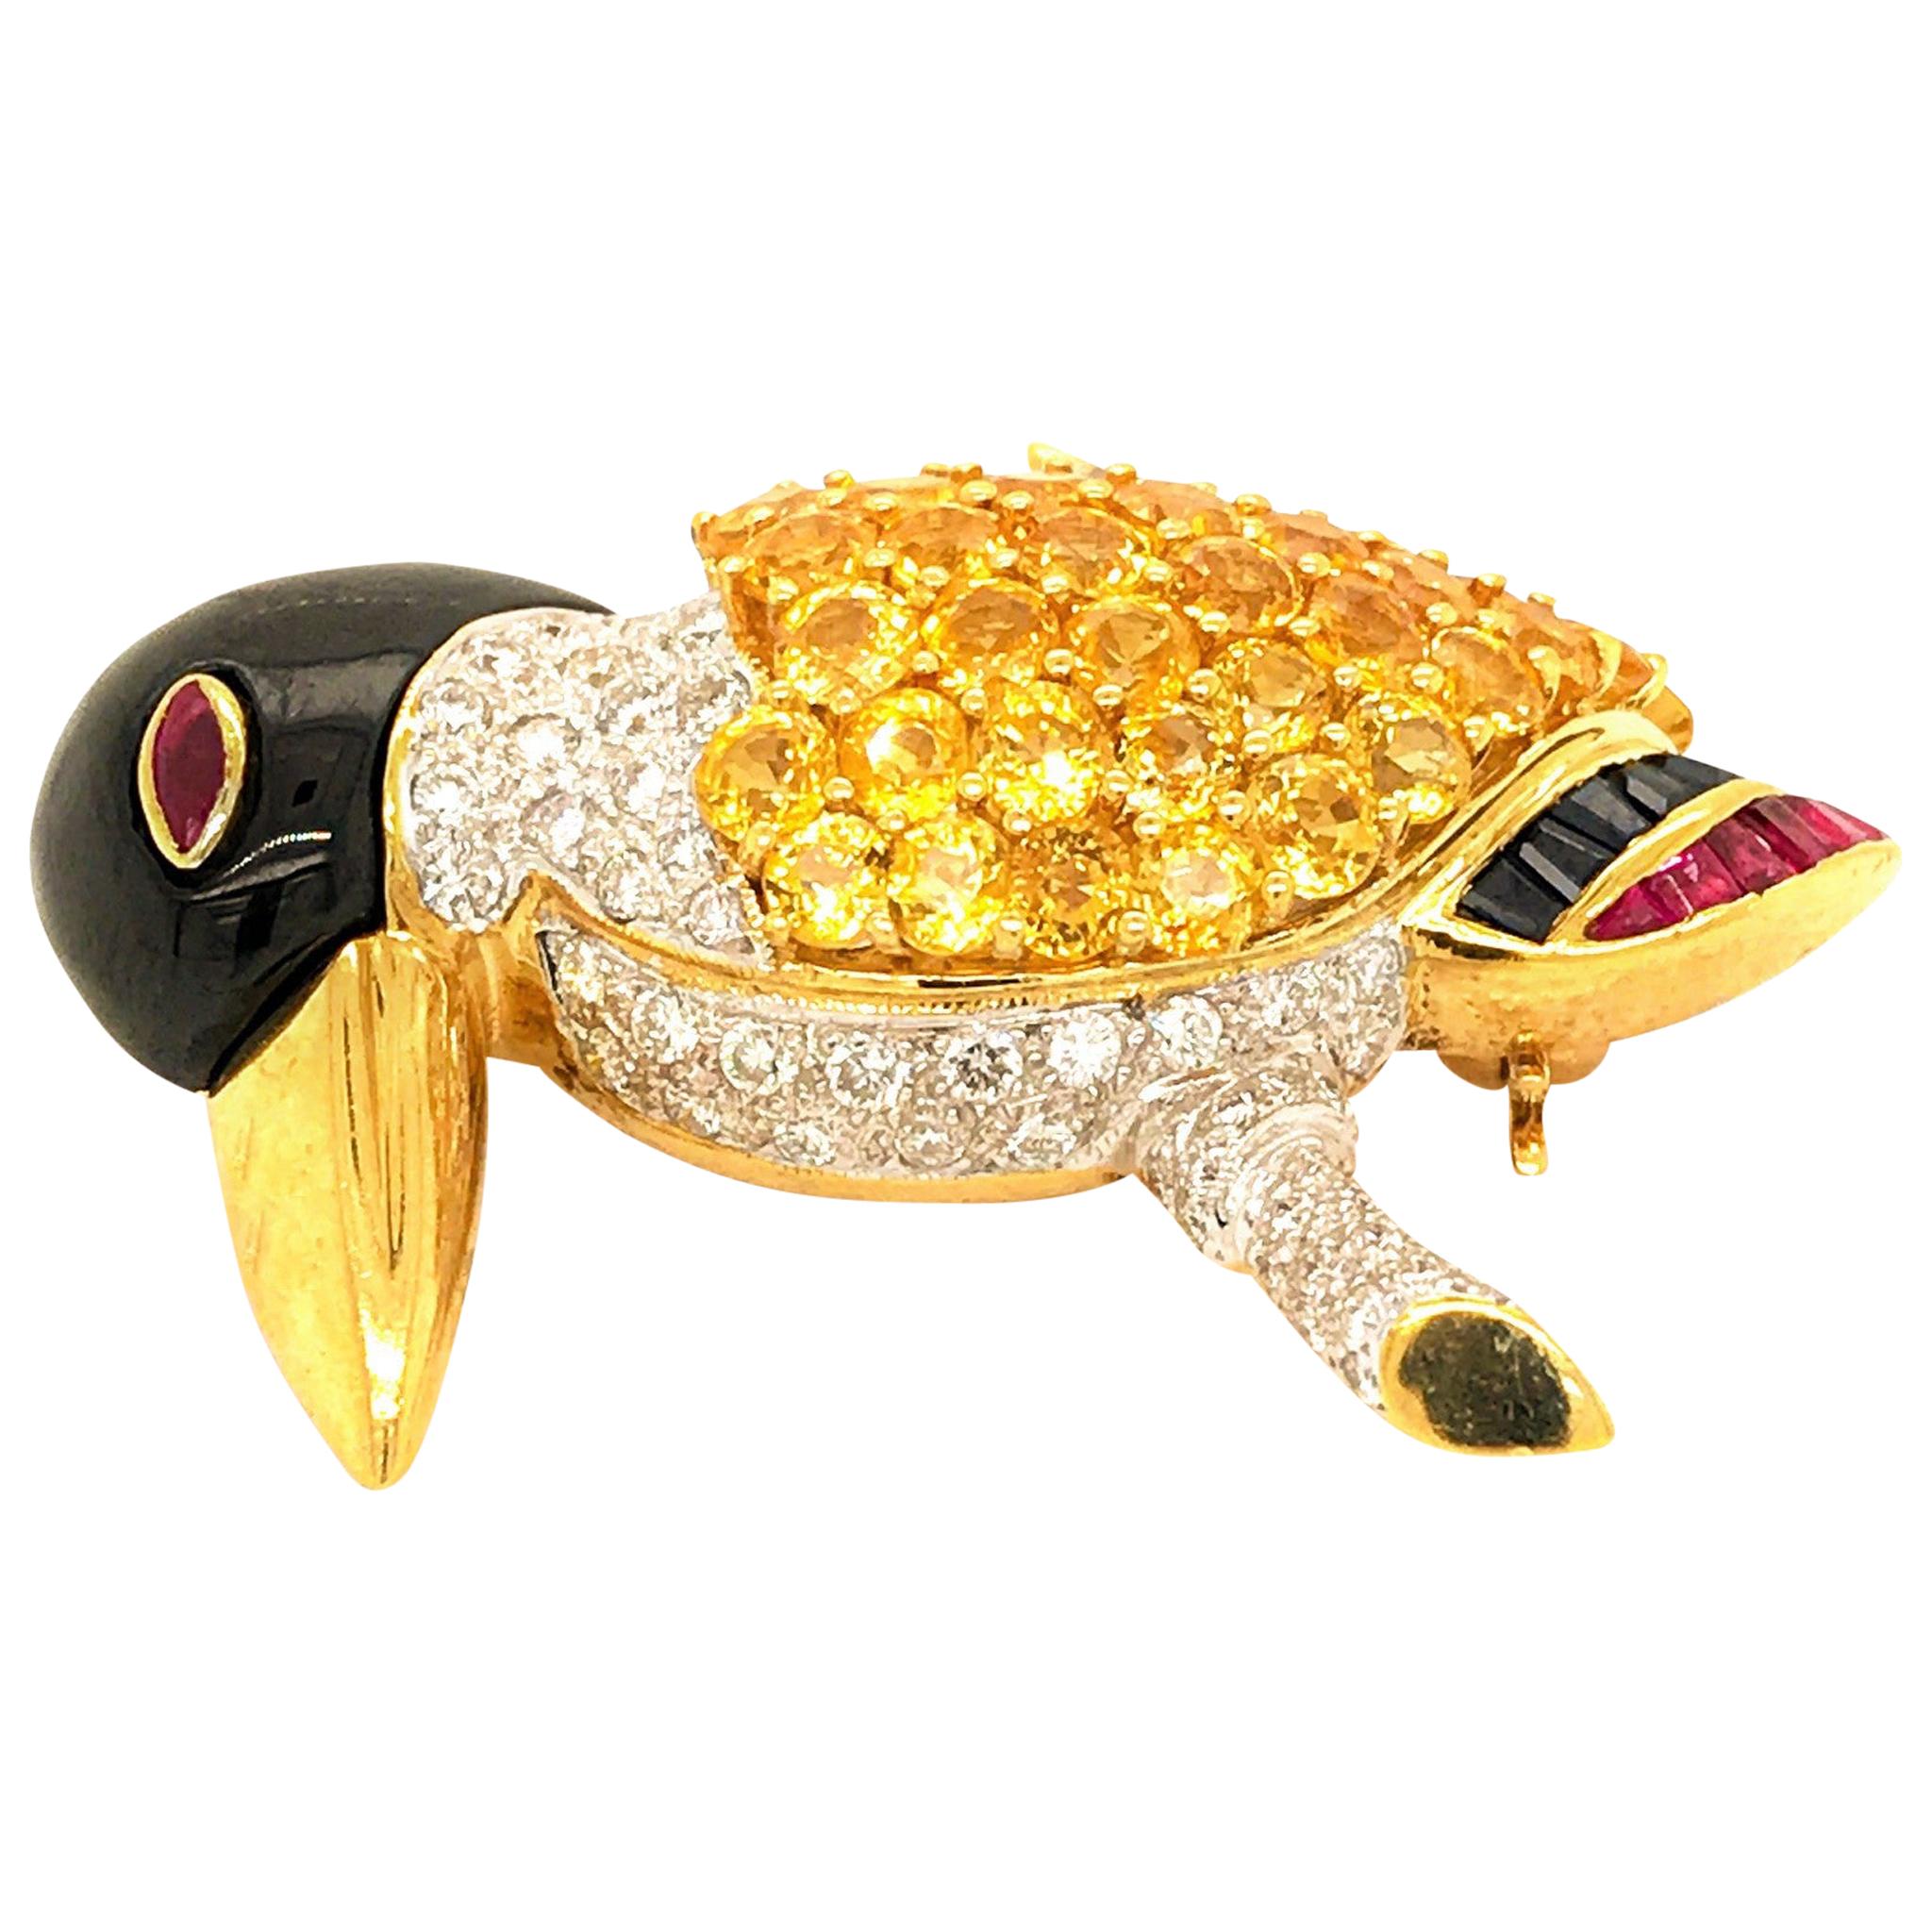 METAL TYPE: 18k Yellow Gold
MAIN STONE: Diamond
SECONDARY STONE: Sapphire
TOTAL WEIGHT: 17.1 grams
LENGTH: 1.75 inches